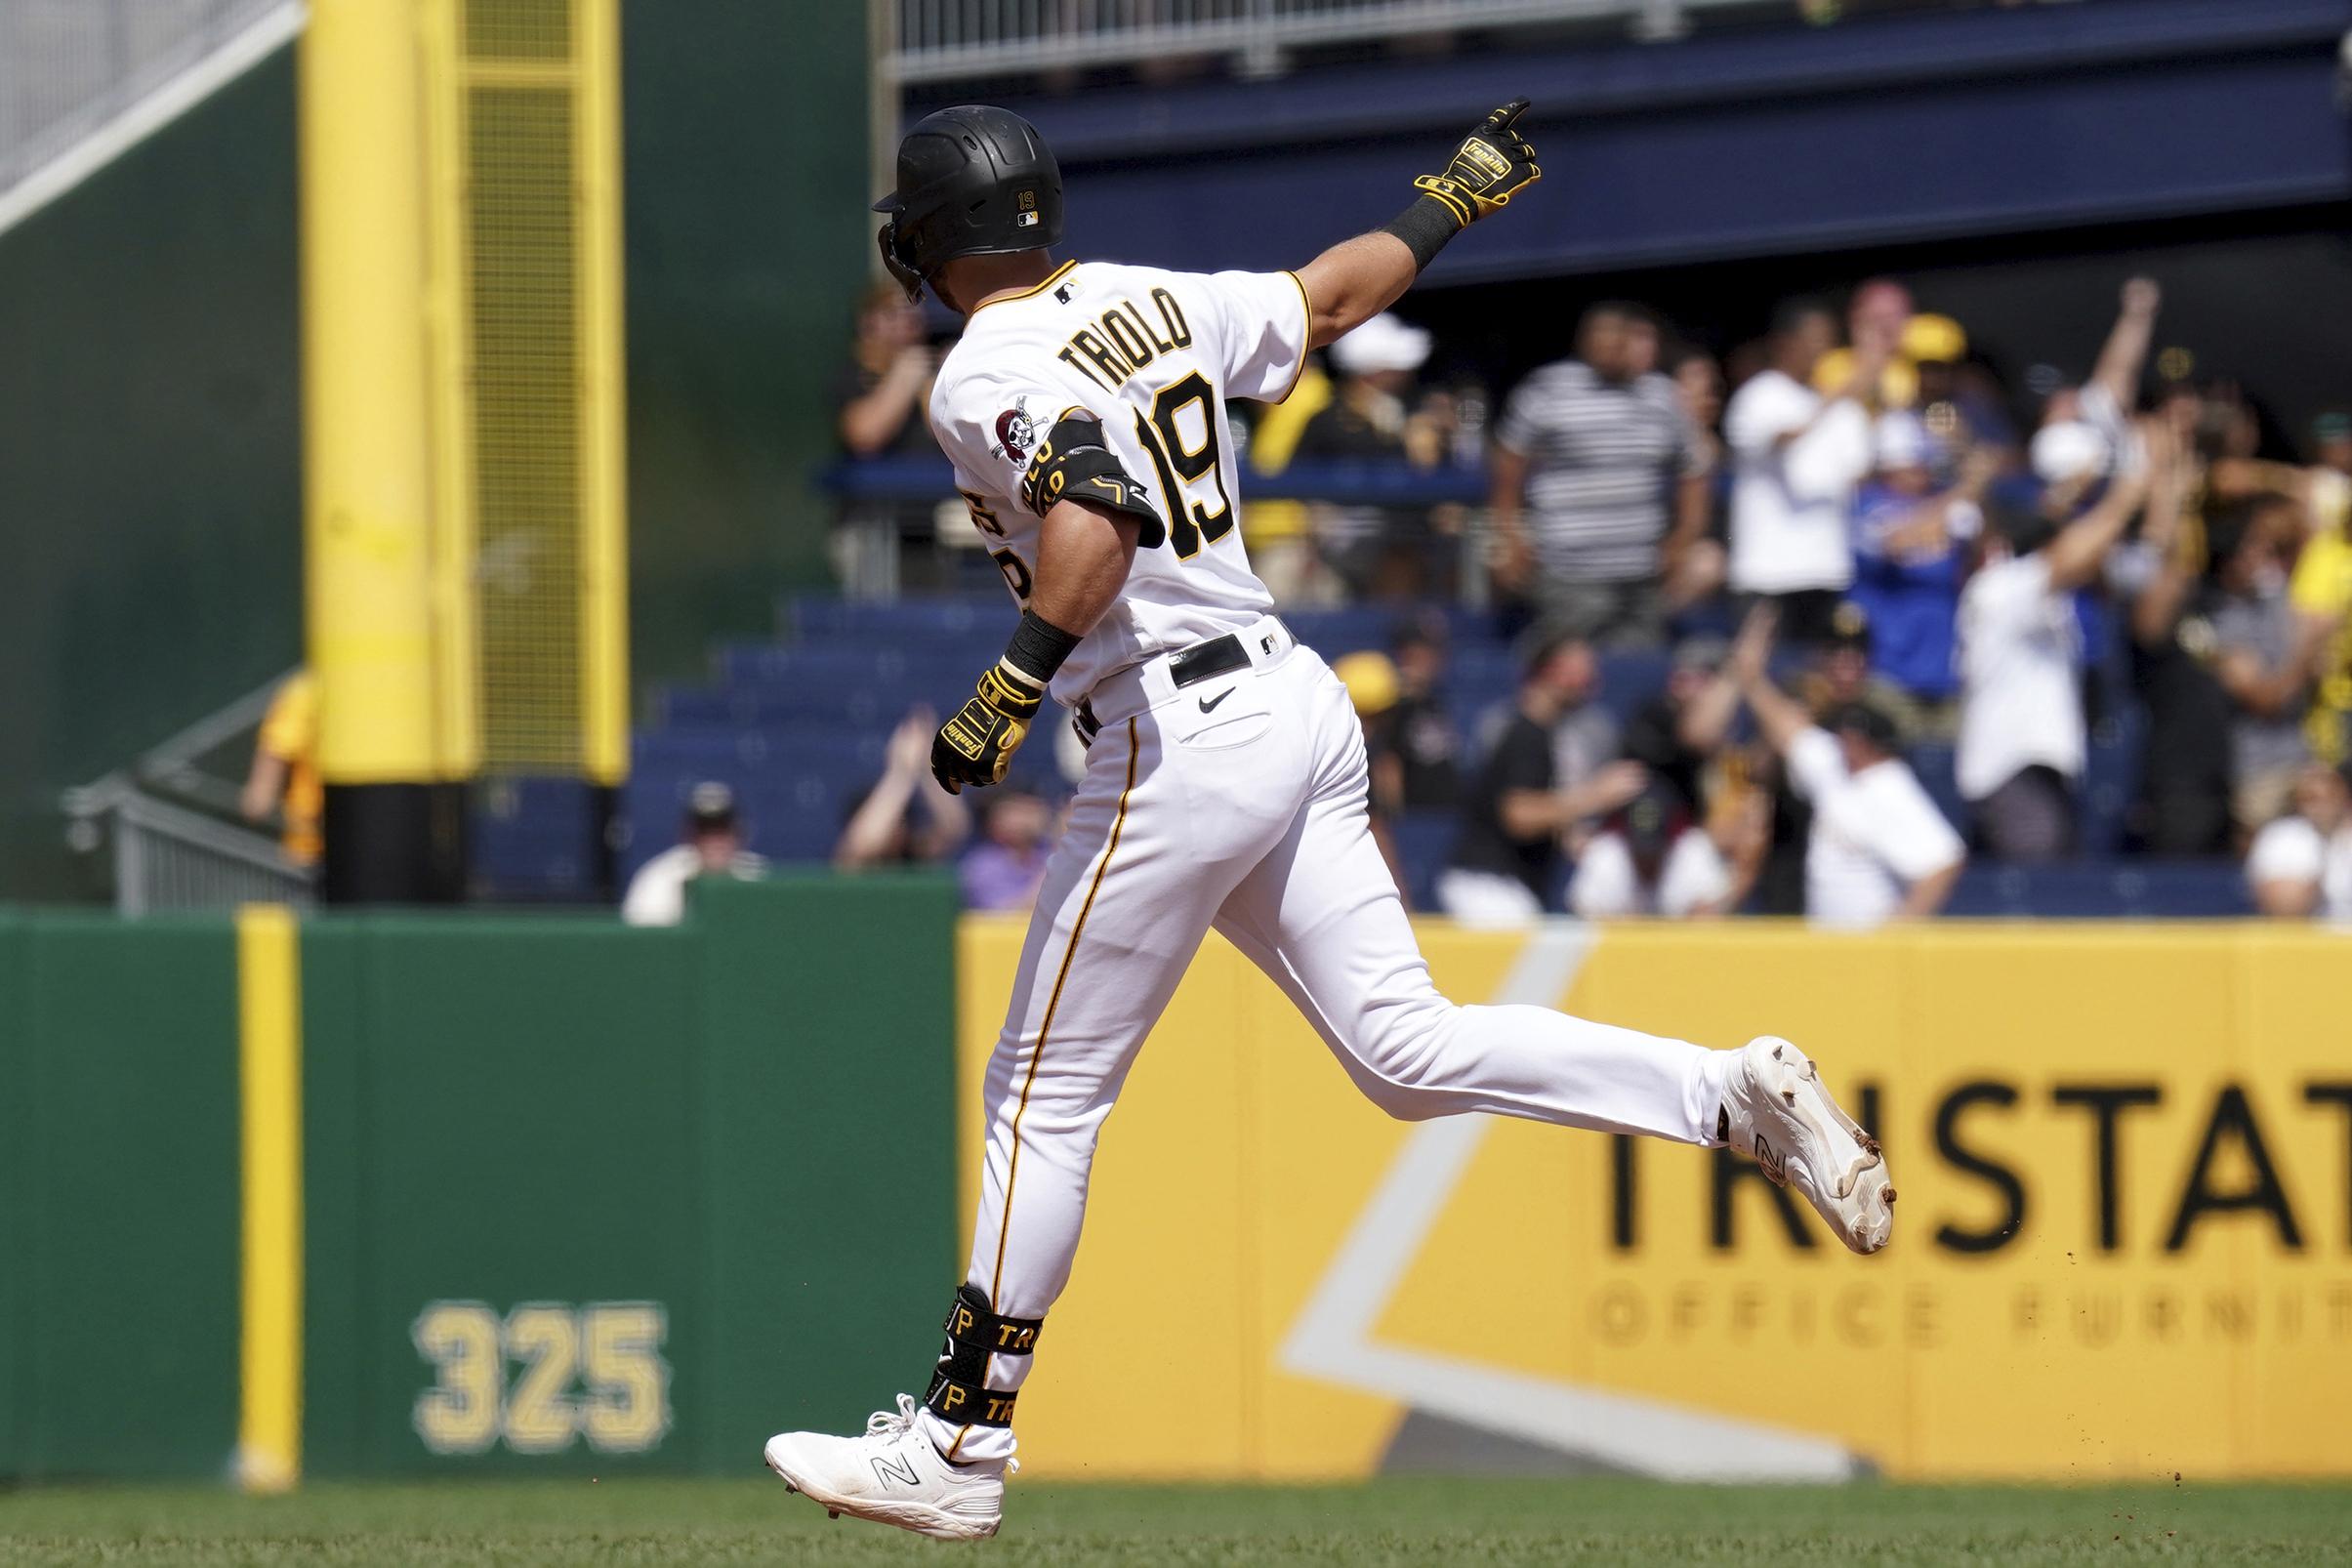 Choi, Triolo spark comeback from 4-run deficit, Pirates top